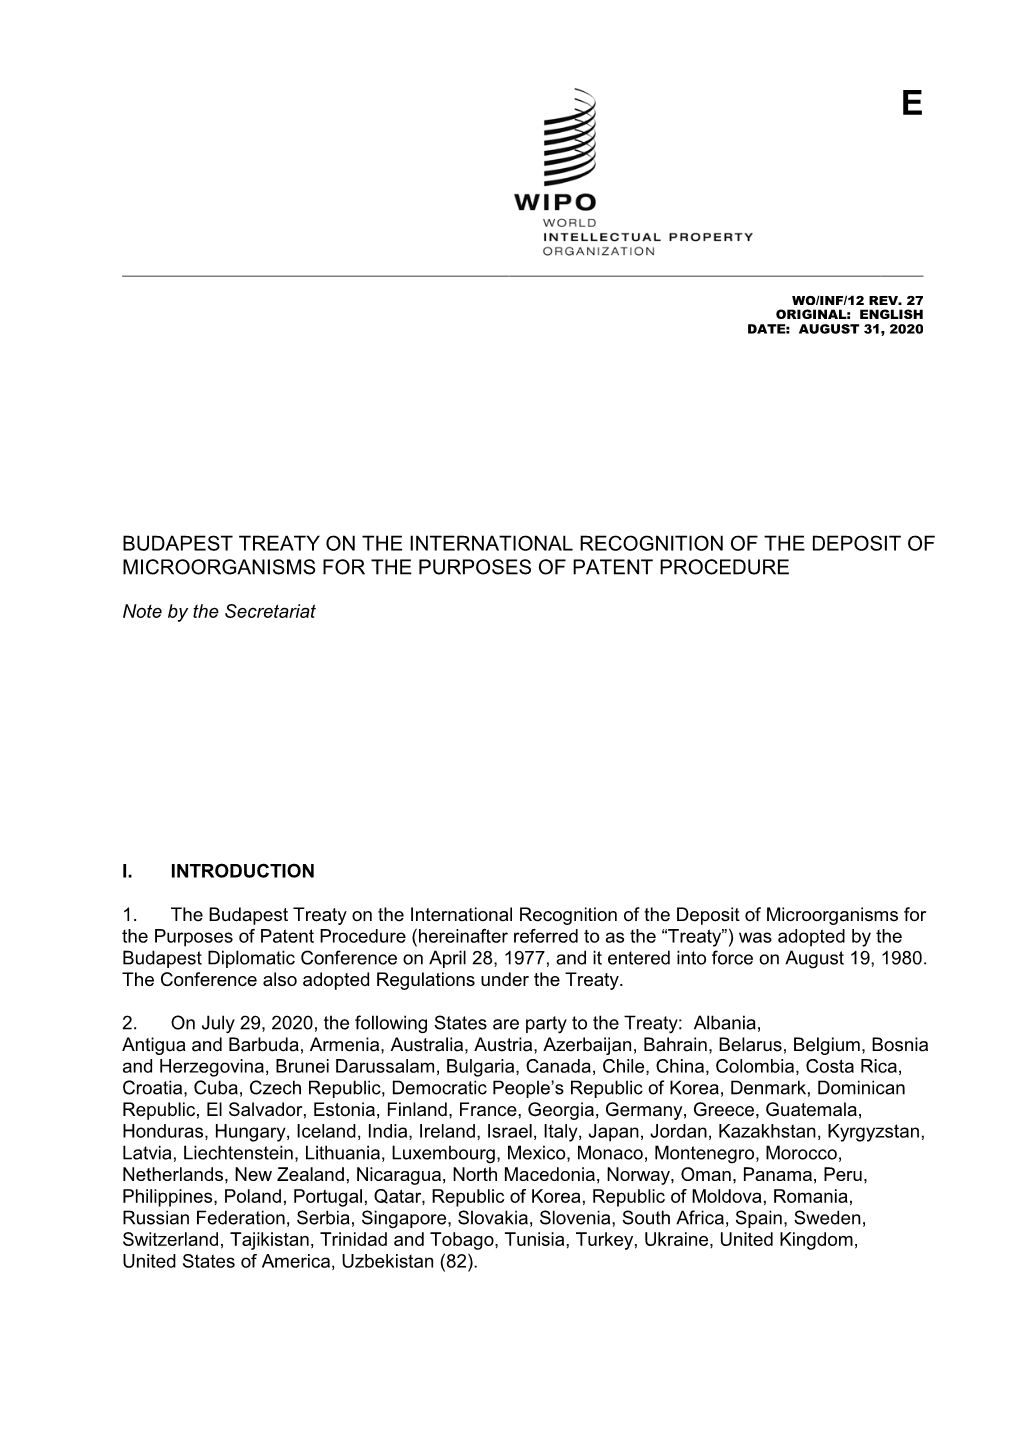 Budapest Treaty on the International Recognition of the Deposit of Microorganisms for the Purposes of Patent Procedure